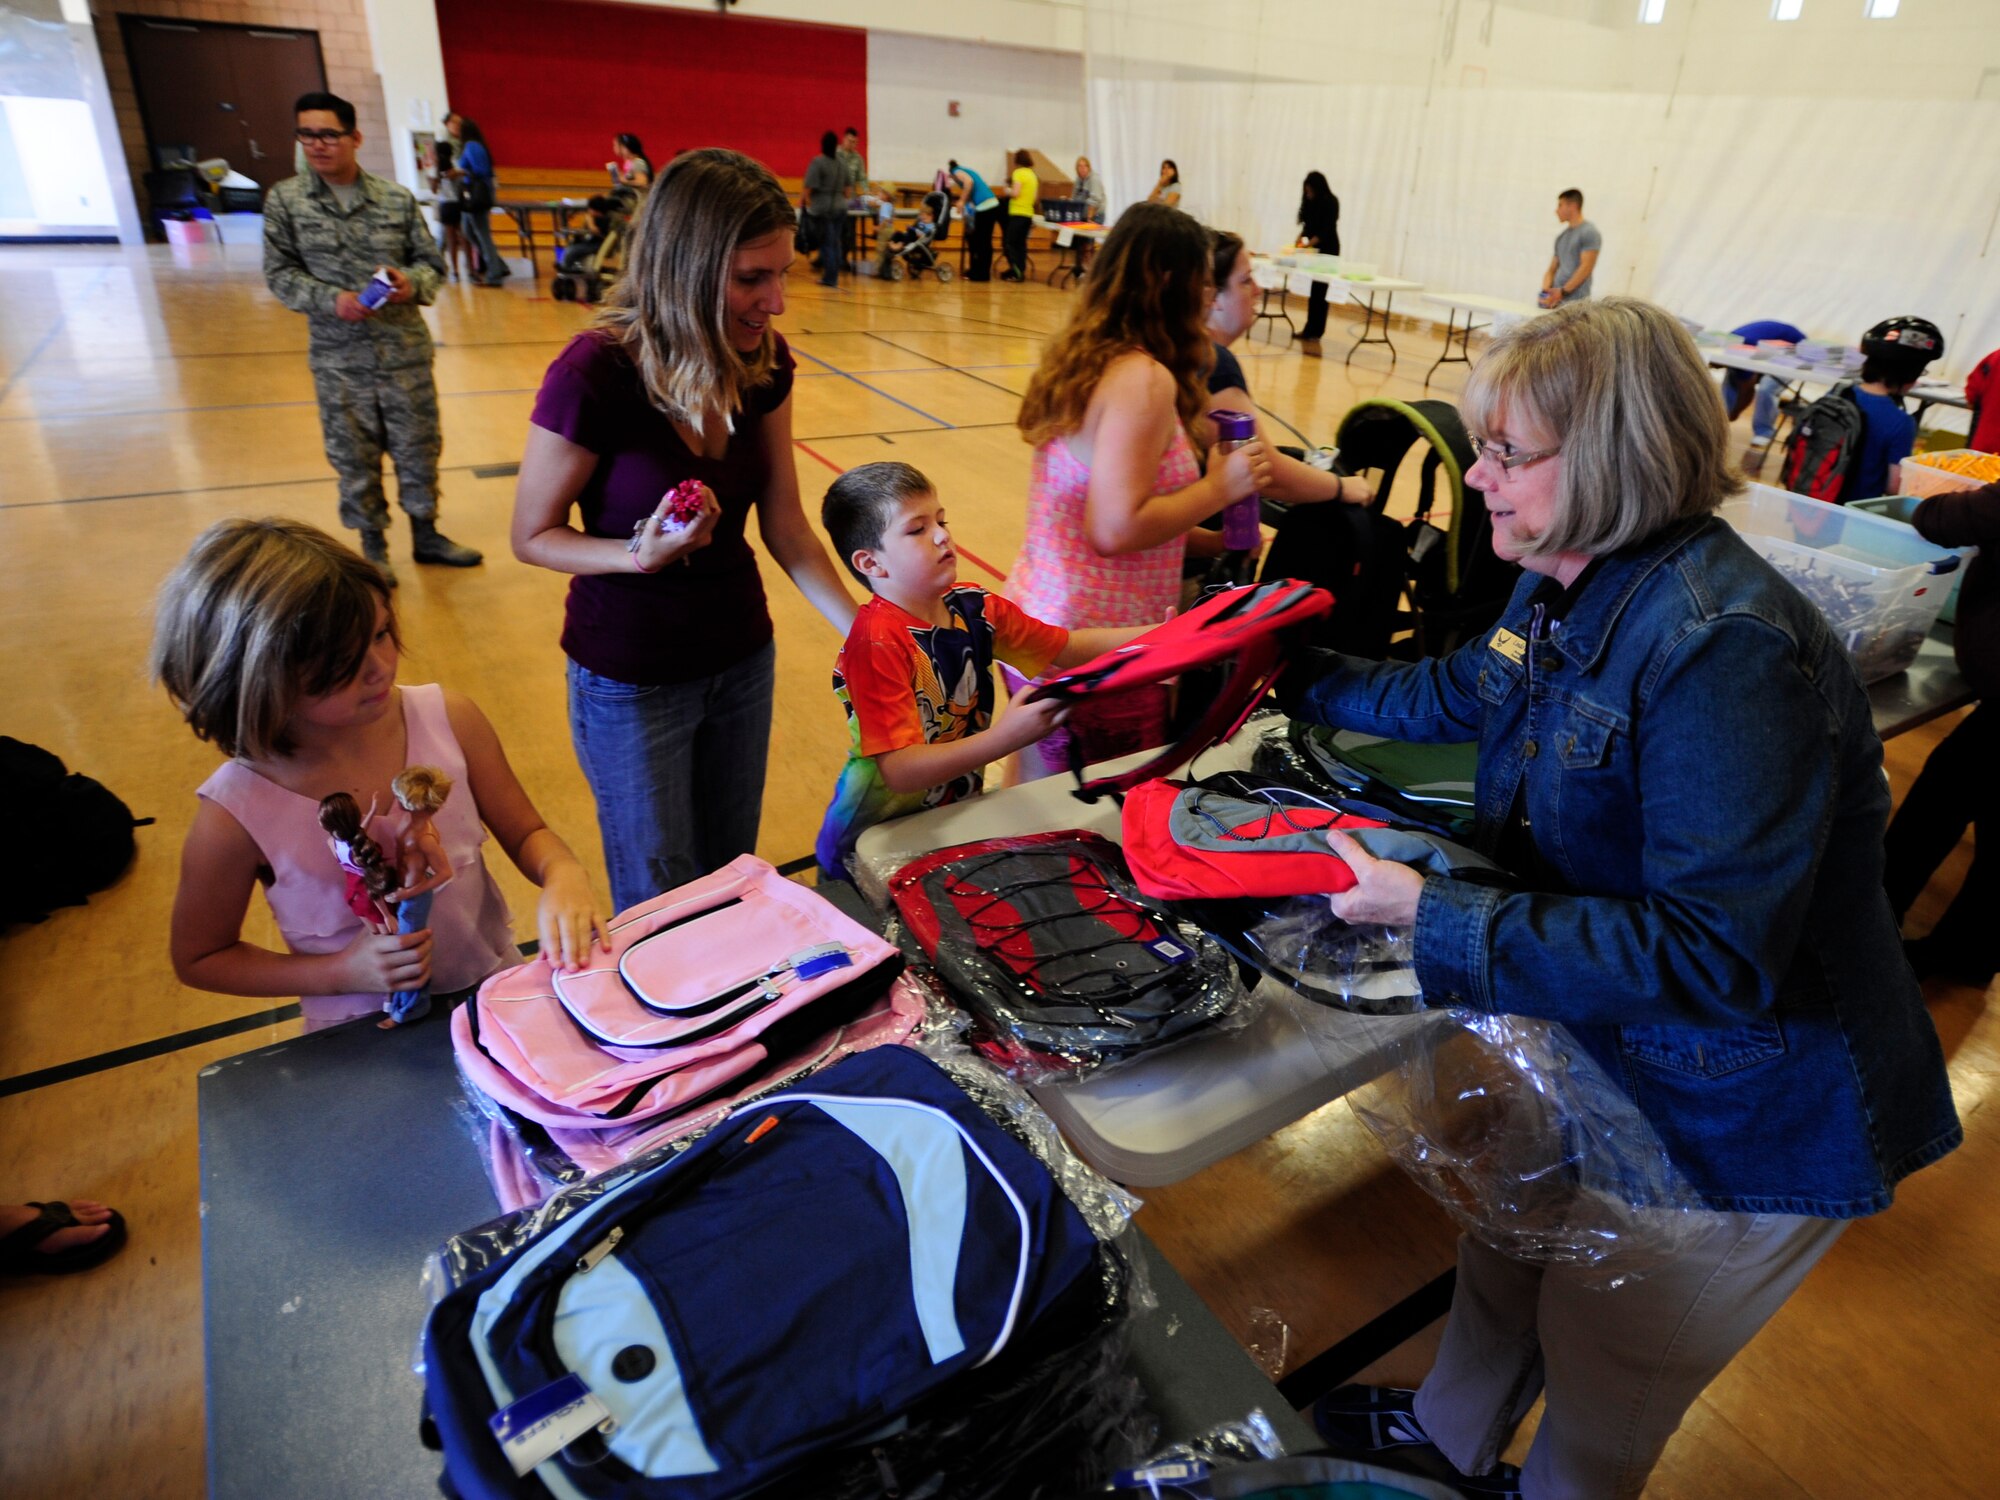 VANDENBERG AIR FORCE BASE, Calif. – Linda Crowder, Airmen and Family Readiness acting director, gives out backpacks as part Backpack Brigade during Salute to Youth event here Thursday, August 15, 2013. Salute to Youth was both an educational and family friendly event. It hosted the Exceptional Family Member Program, local schools, Backpack Brigade, food, games and prizes. (U.S. Air Force photo/Airman Yvonne Morales)